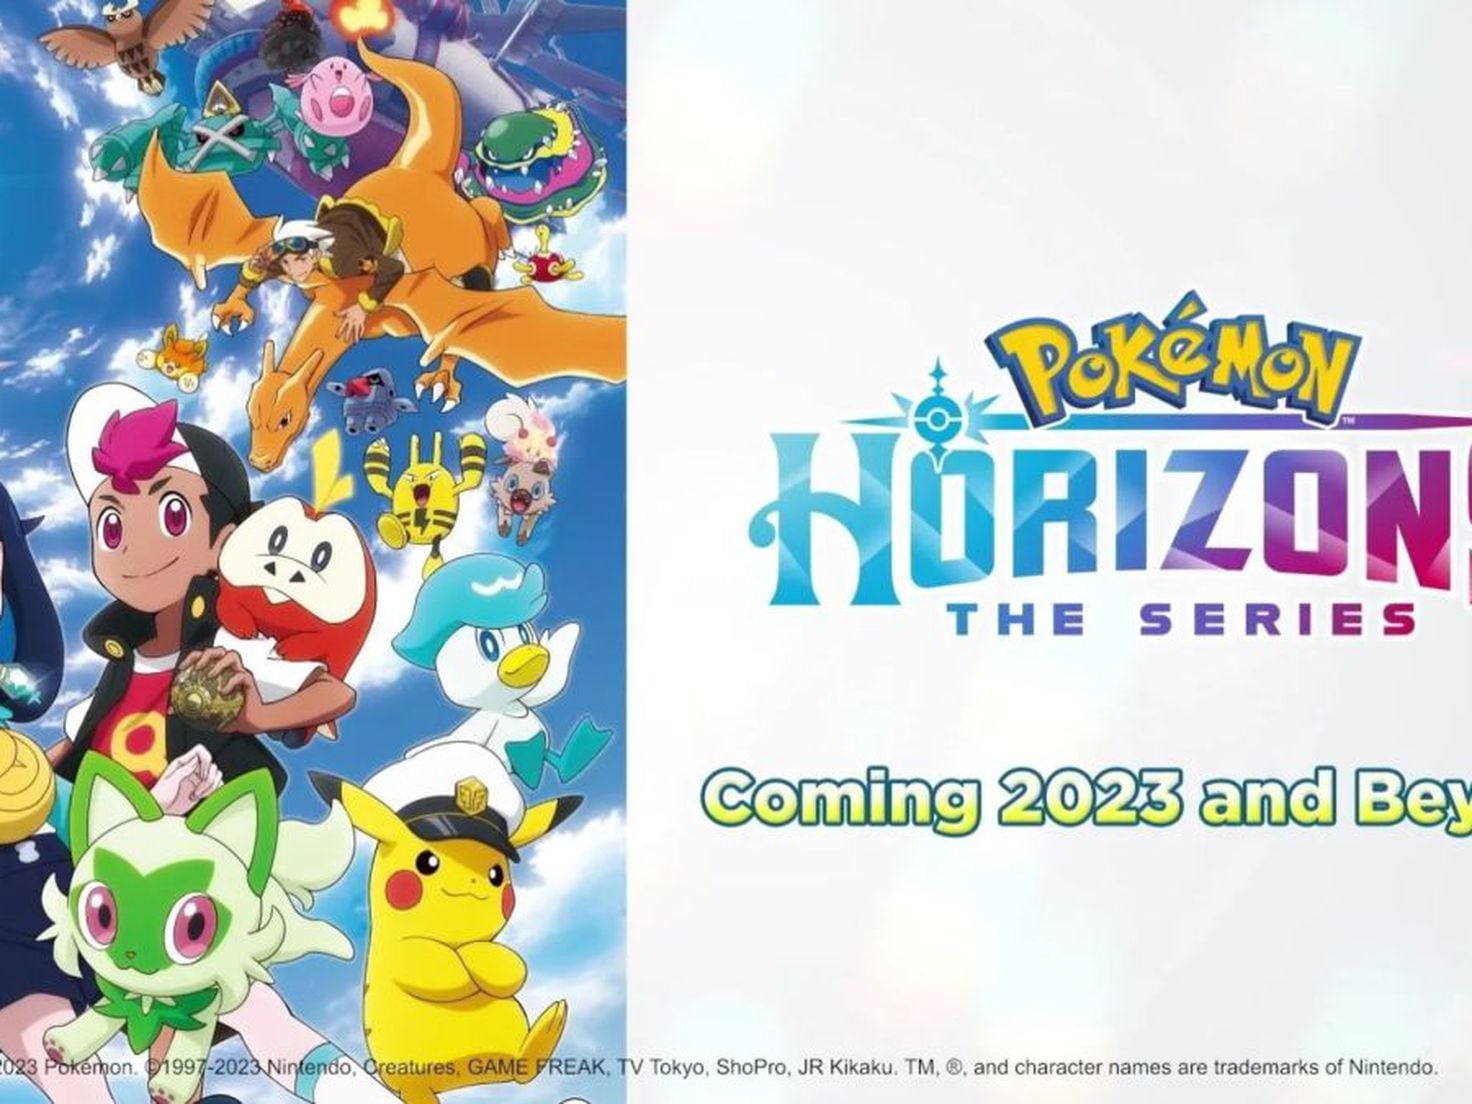 Pokémon Horizons: The Series gets a trailer to show off its new heroes, the  Paldea region, and more - Meristation